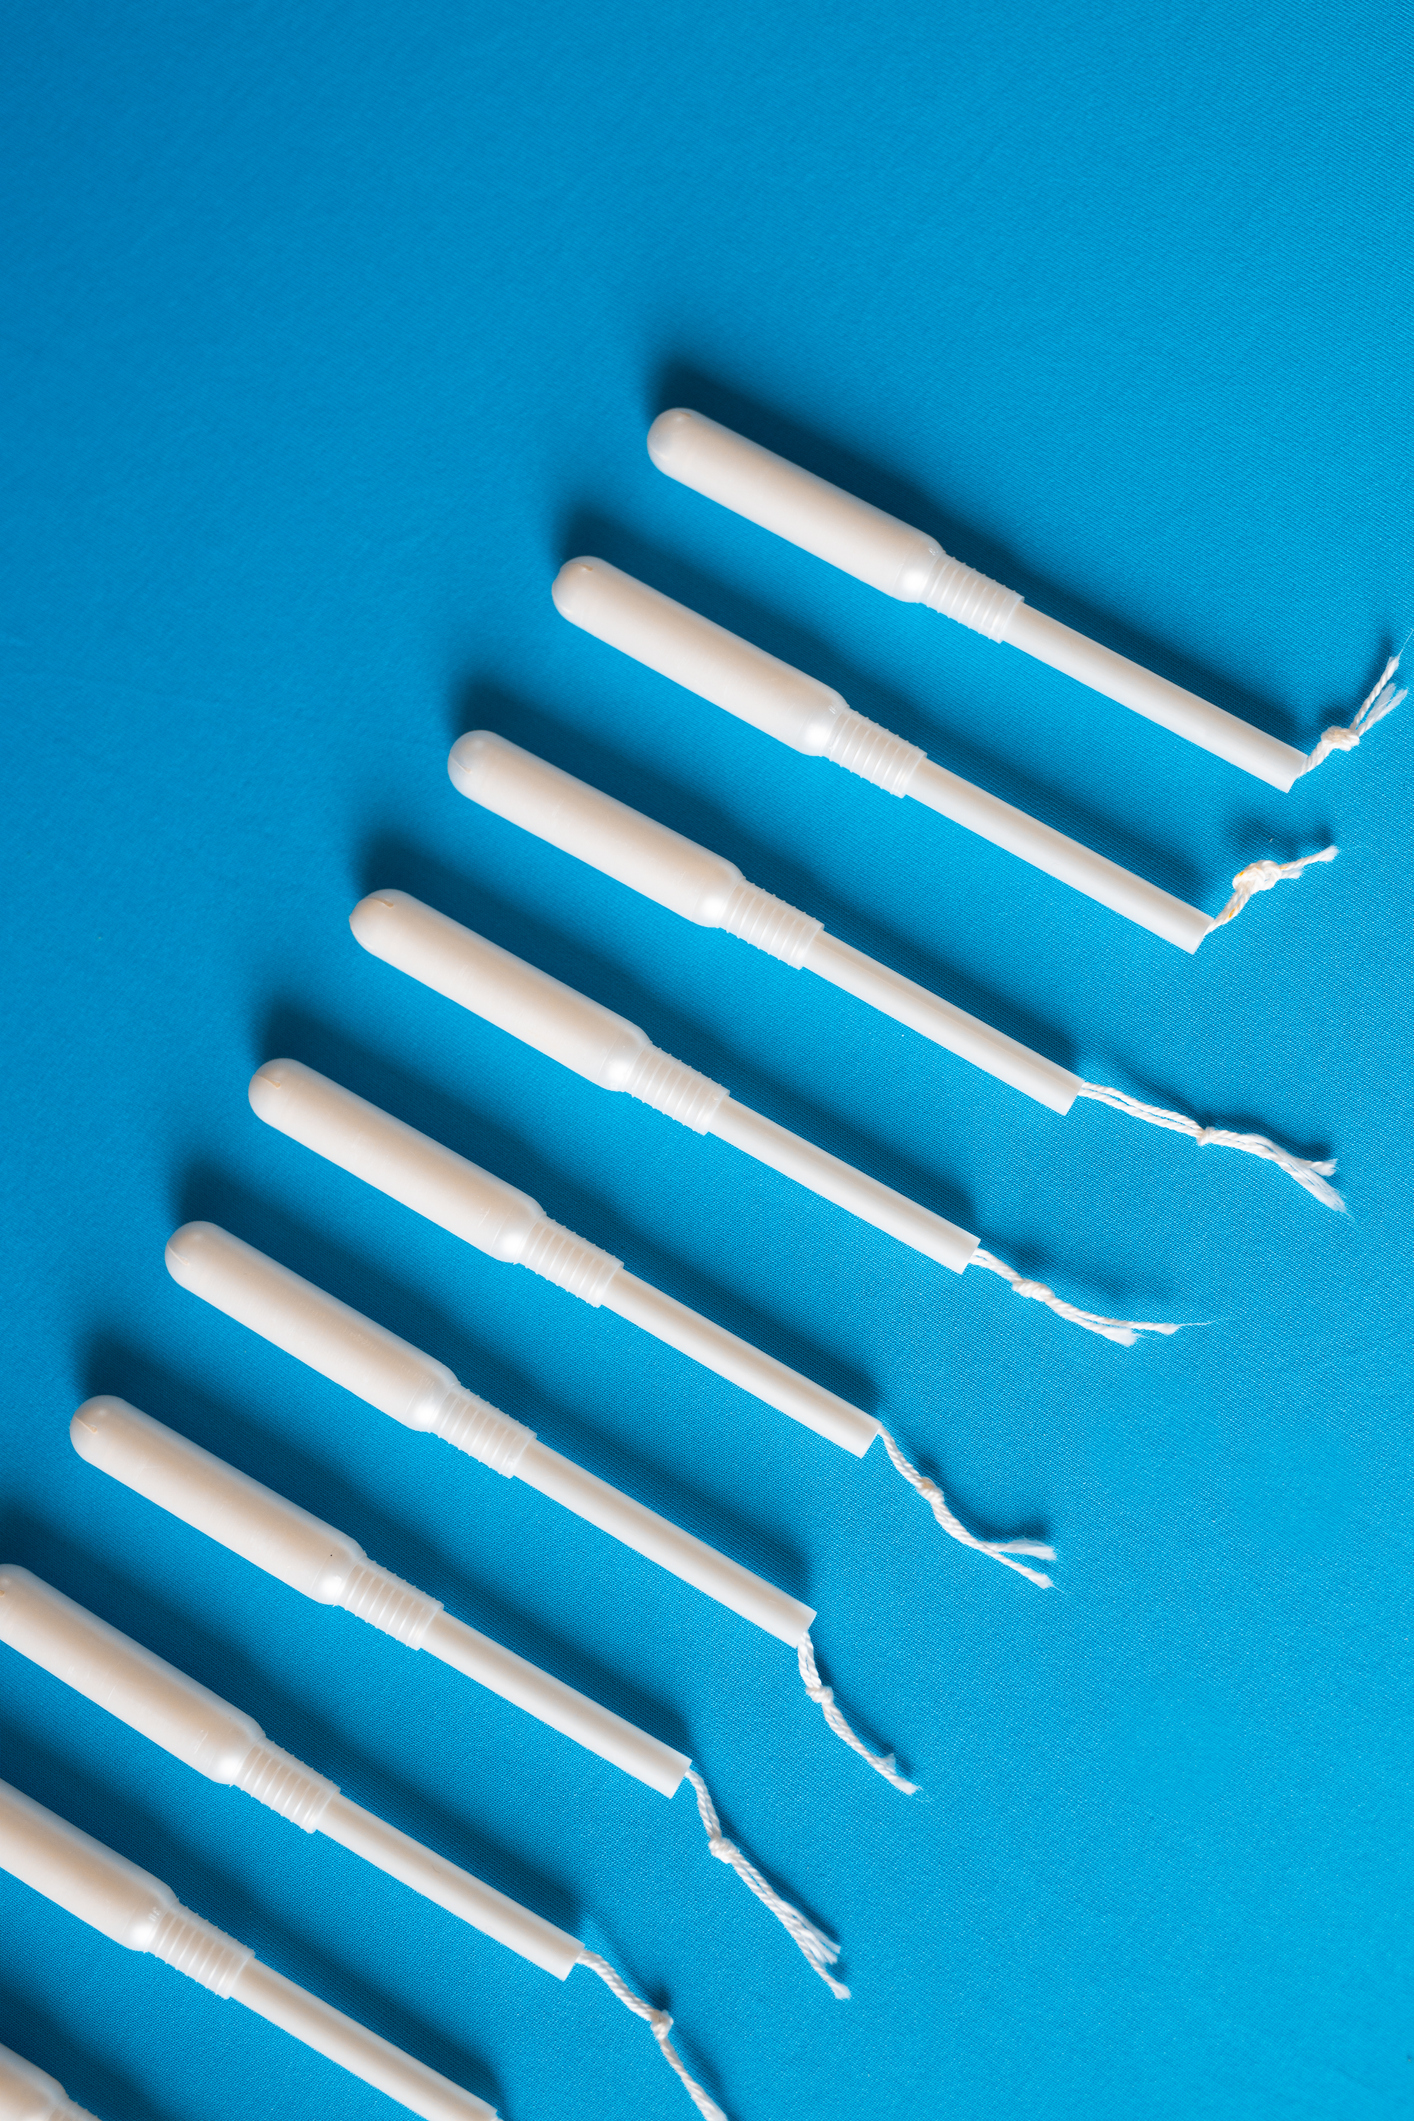 Arrangement of tampons on blue background